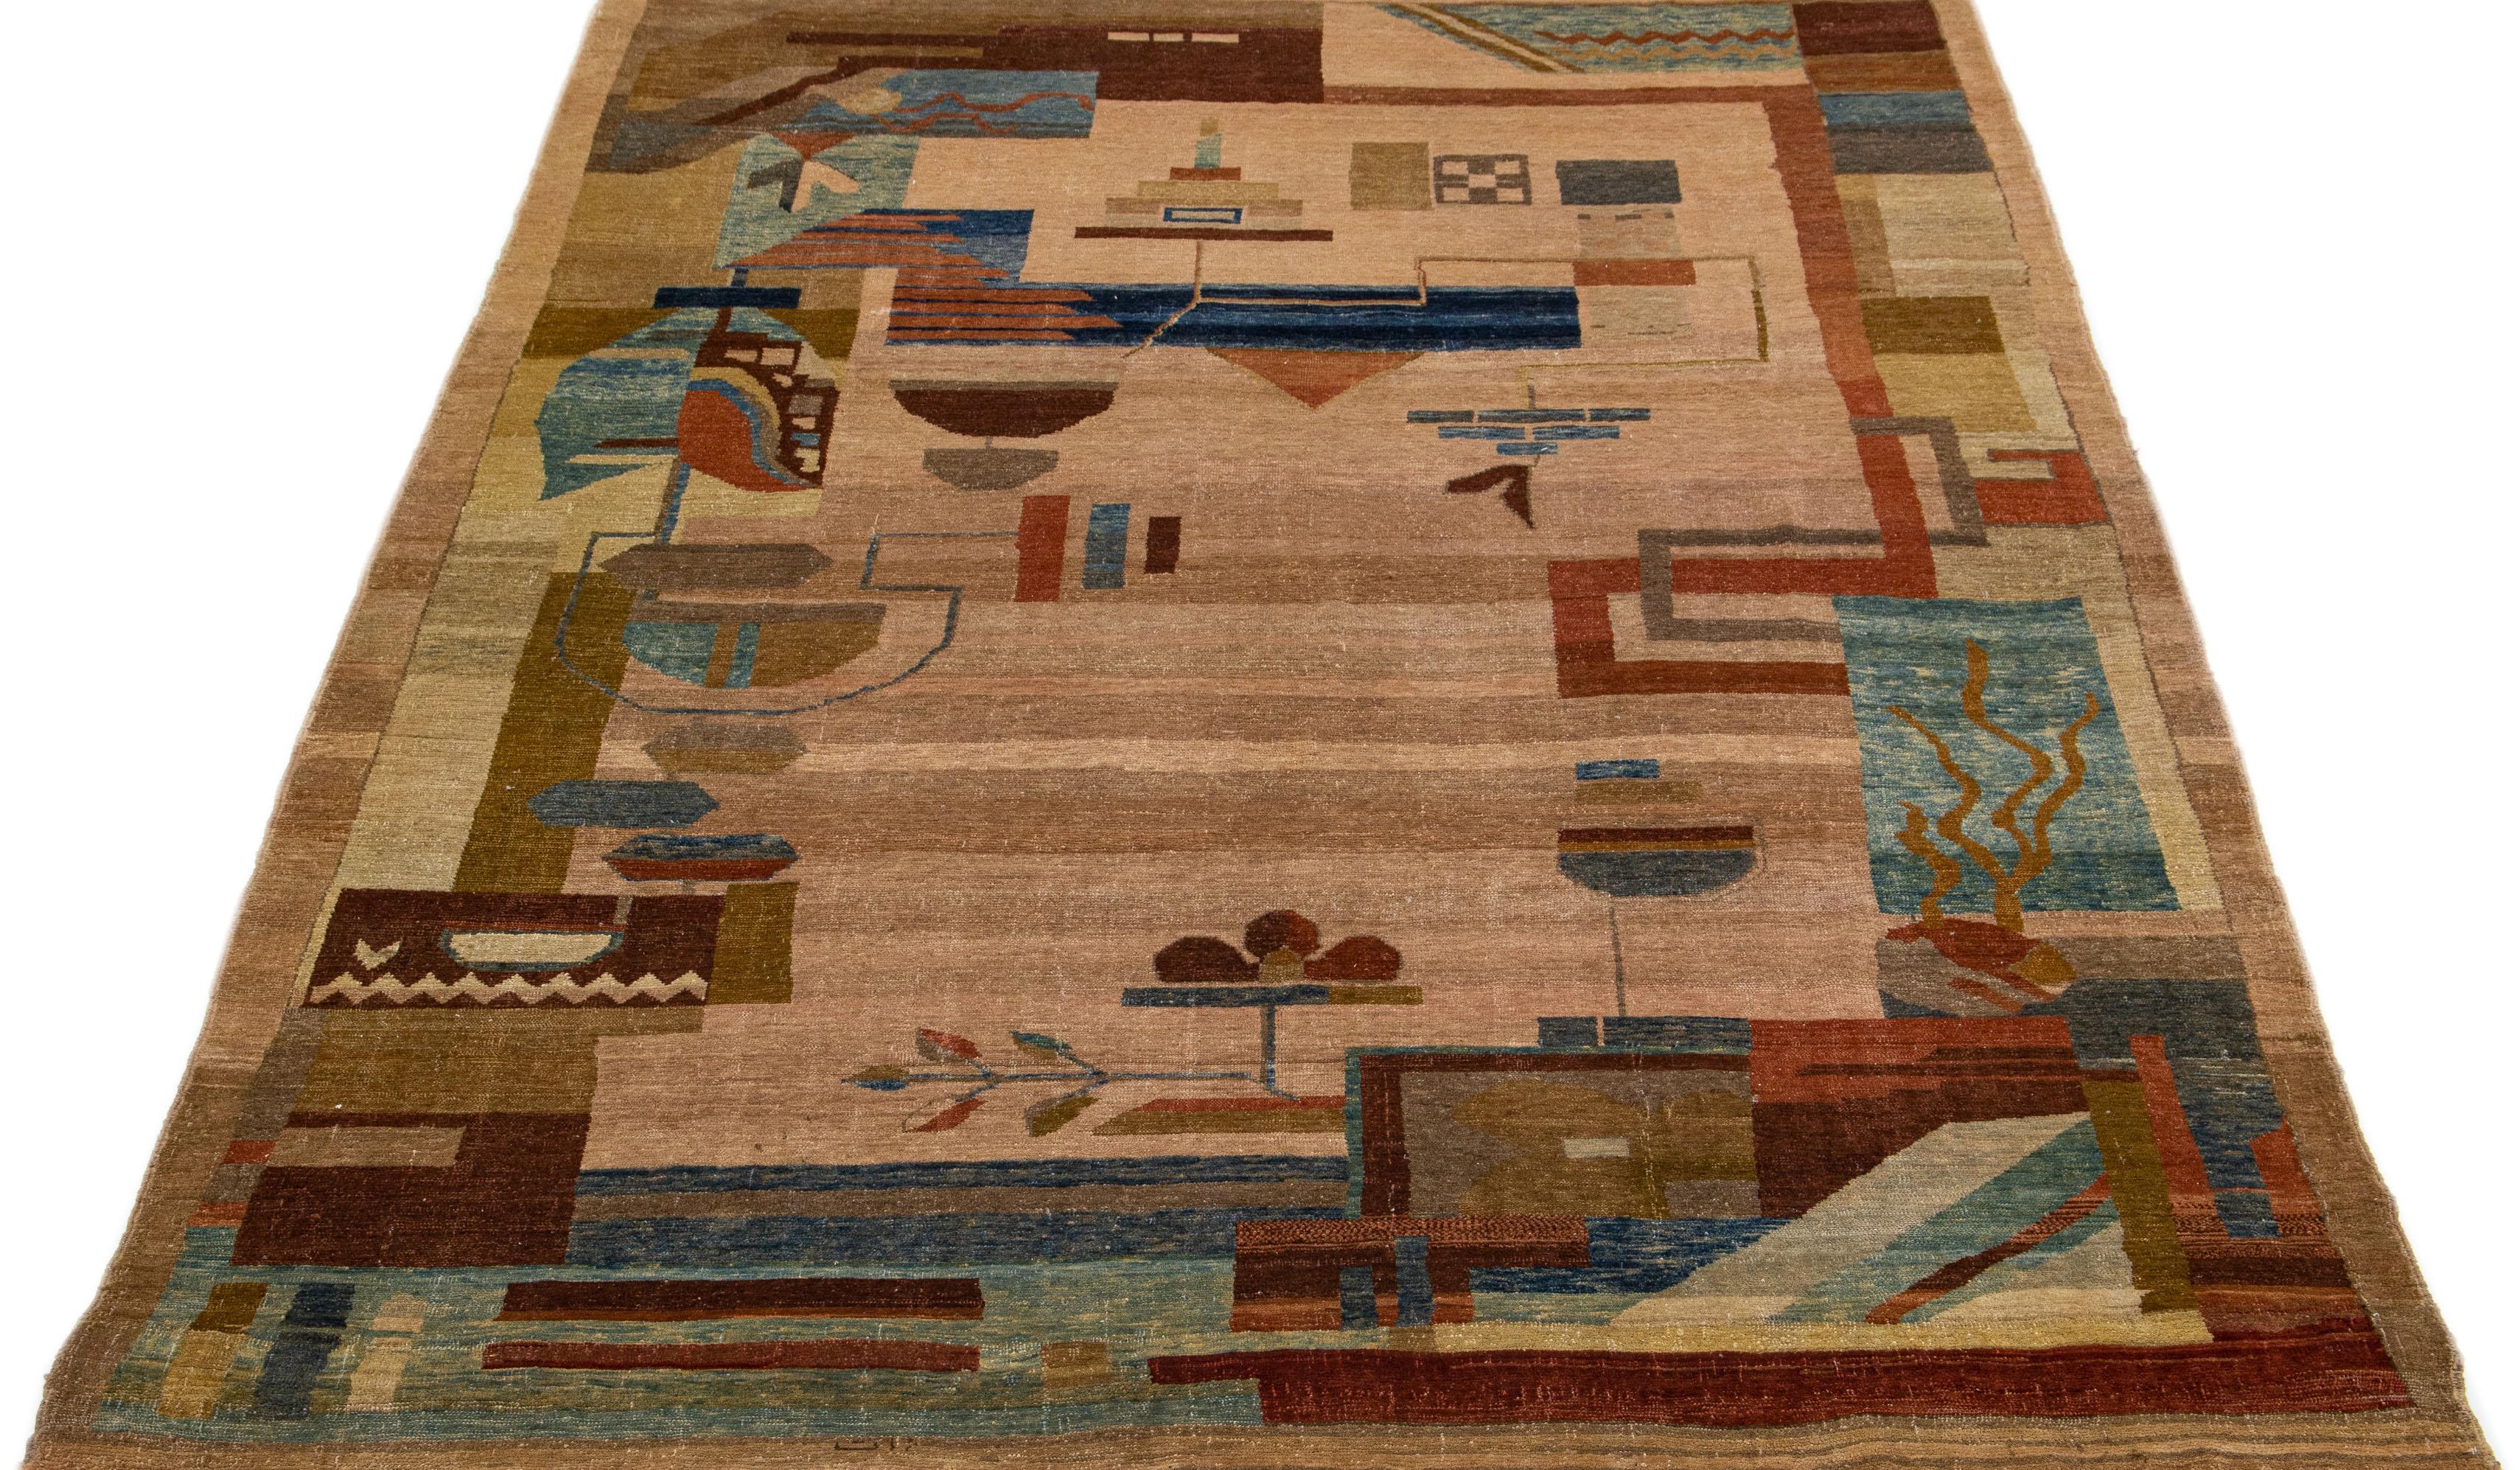 This stunning vintage wool rug, intricately hand-knotted in the Arts & Crafts style, features a warm brown color field with striking blue and rust accents woven into an exquisite Allover pattern design.

This rug measures 7'8